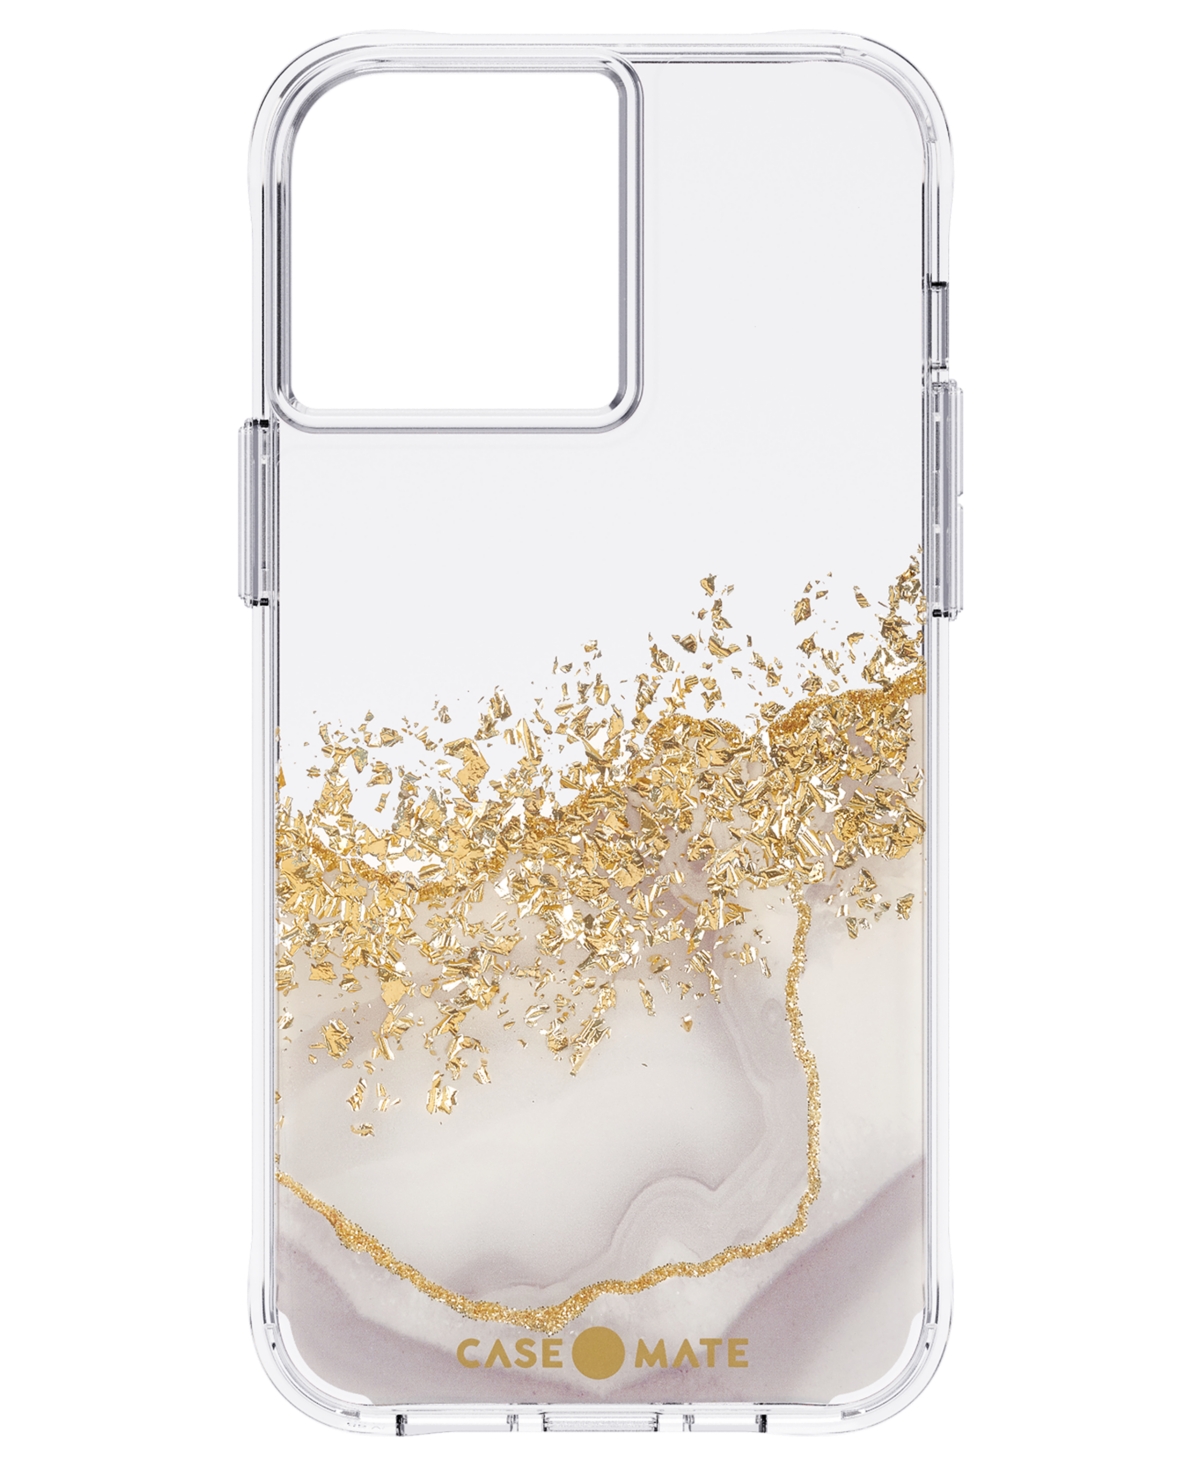 Case-mate Karat Case For Apple Iphone 13 Pro Max And 12 Pro Max In Karat Marble